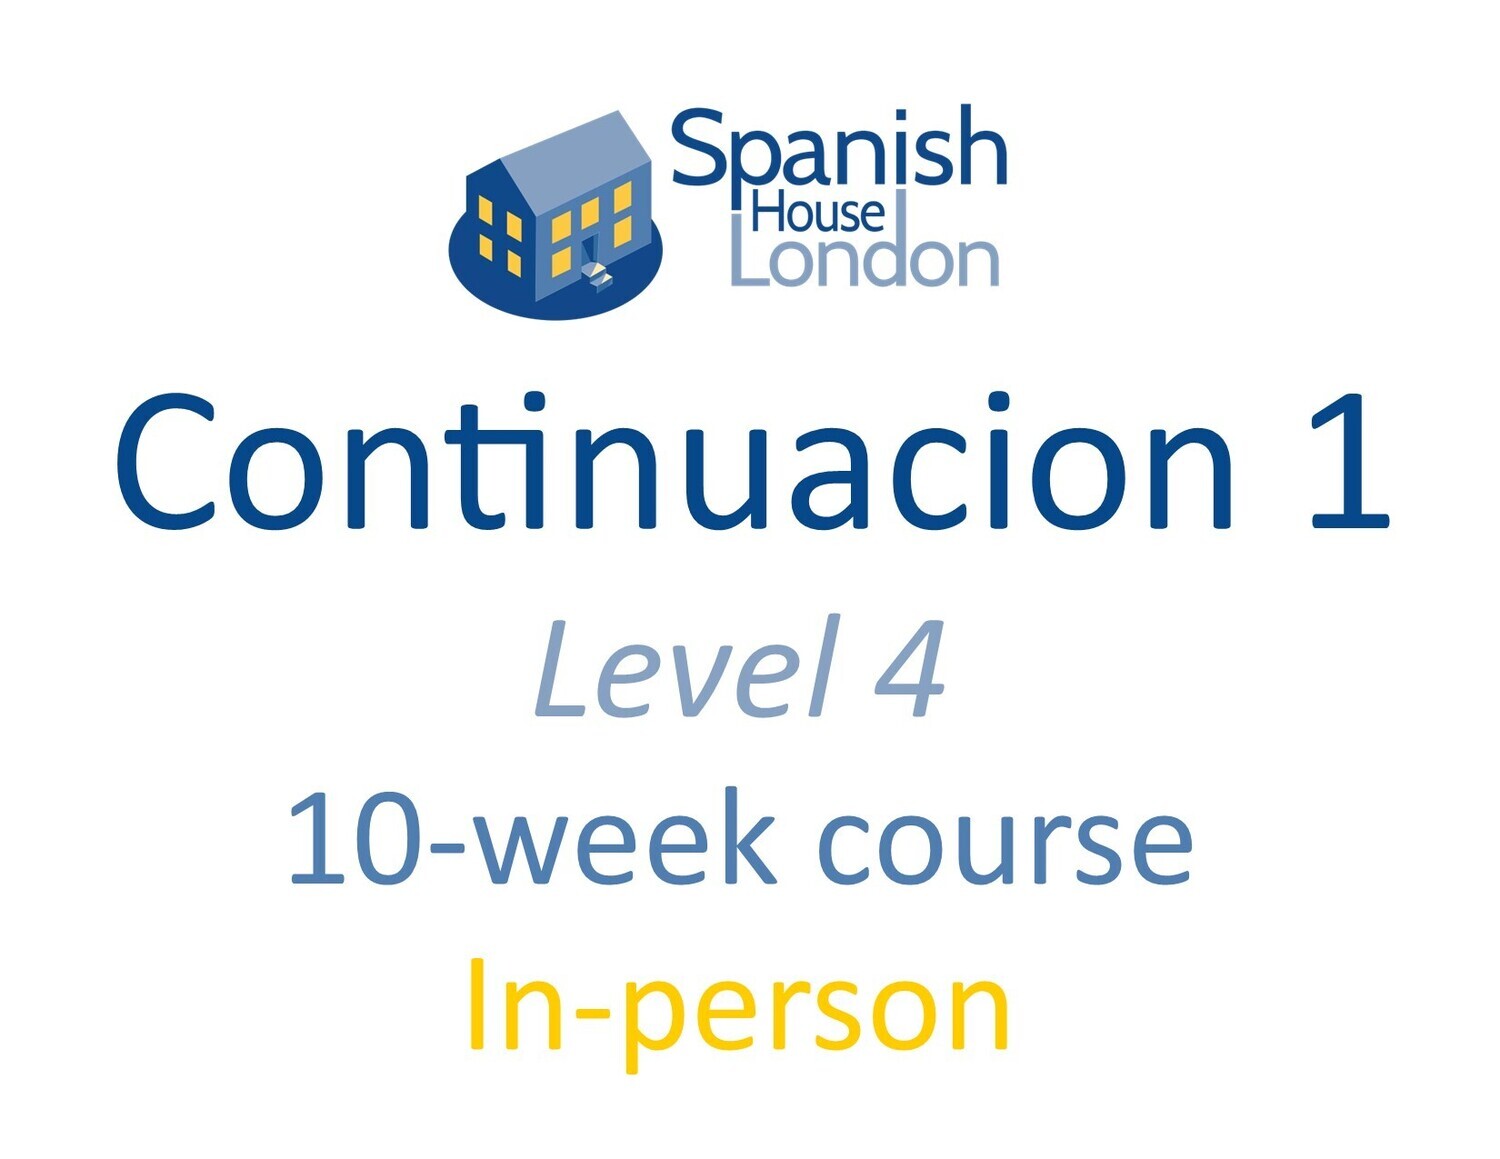 Continuacion 1 Course starting on 4th July at 6pm in Clapham North